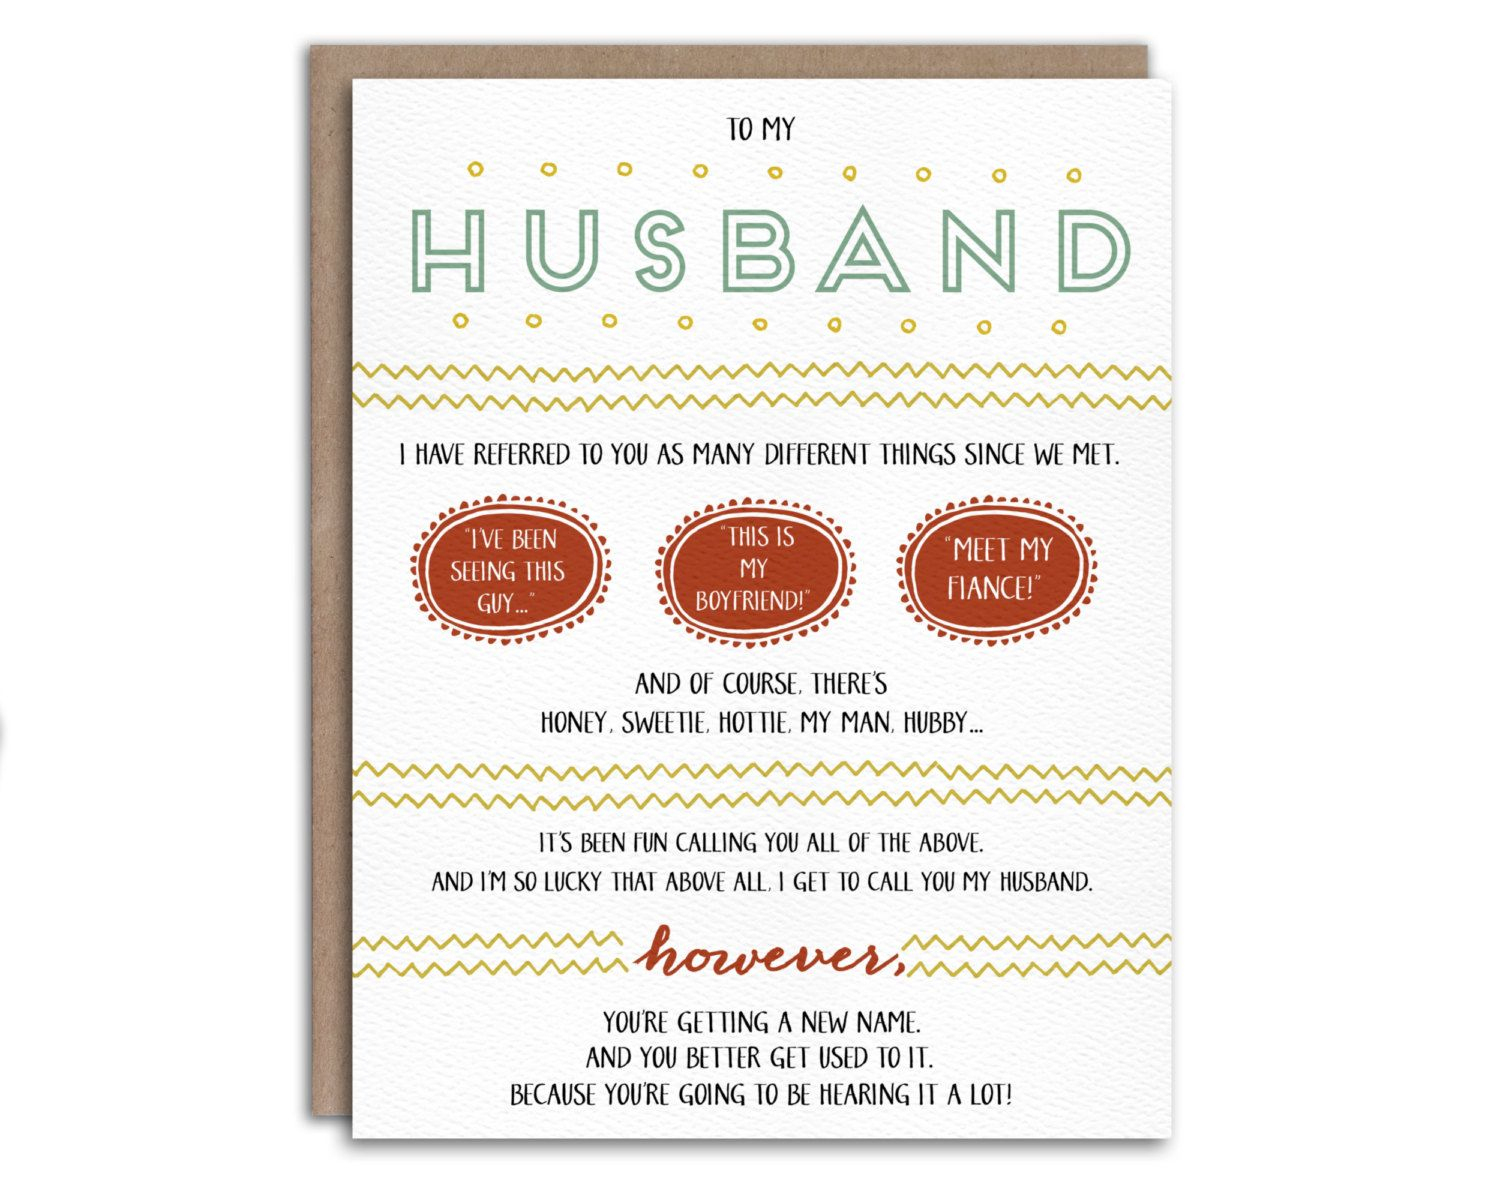 Printable Pregnancy Reveal Card For Husbandwrittenindetail - Free Printable Pregnancy Announcement Cards